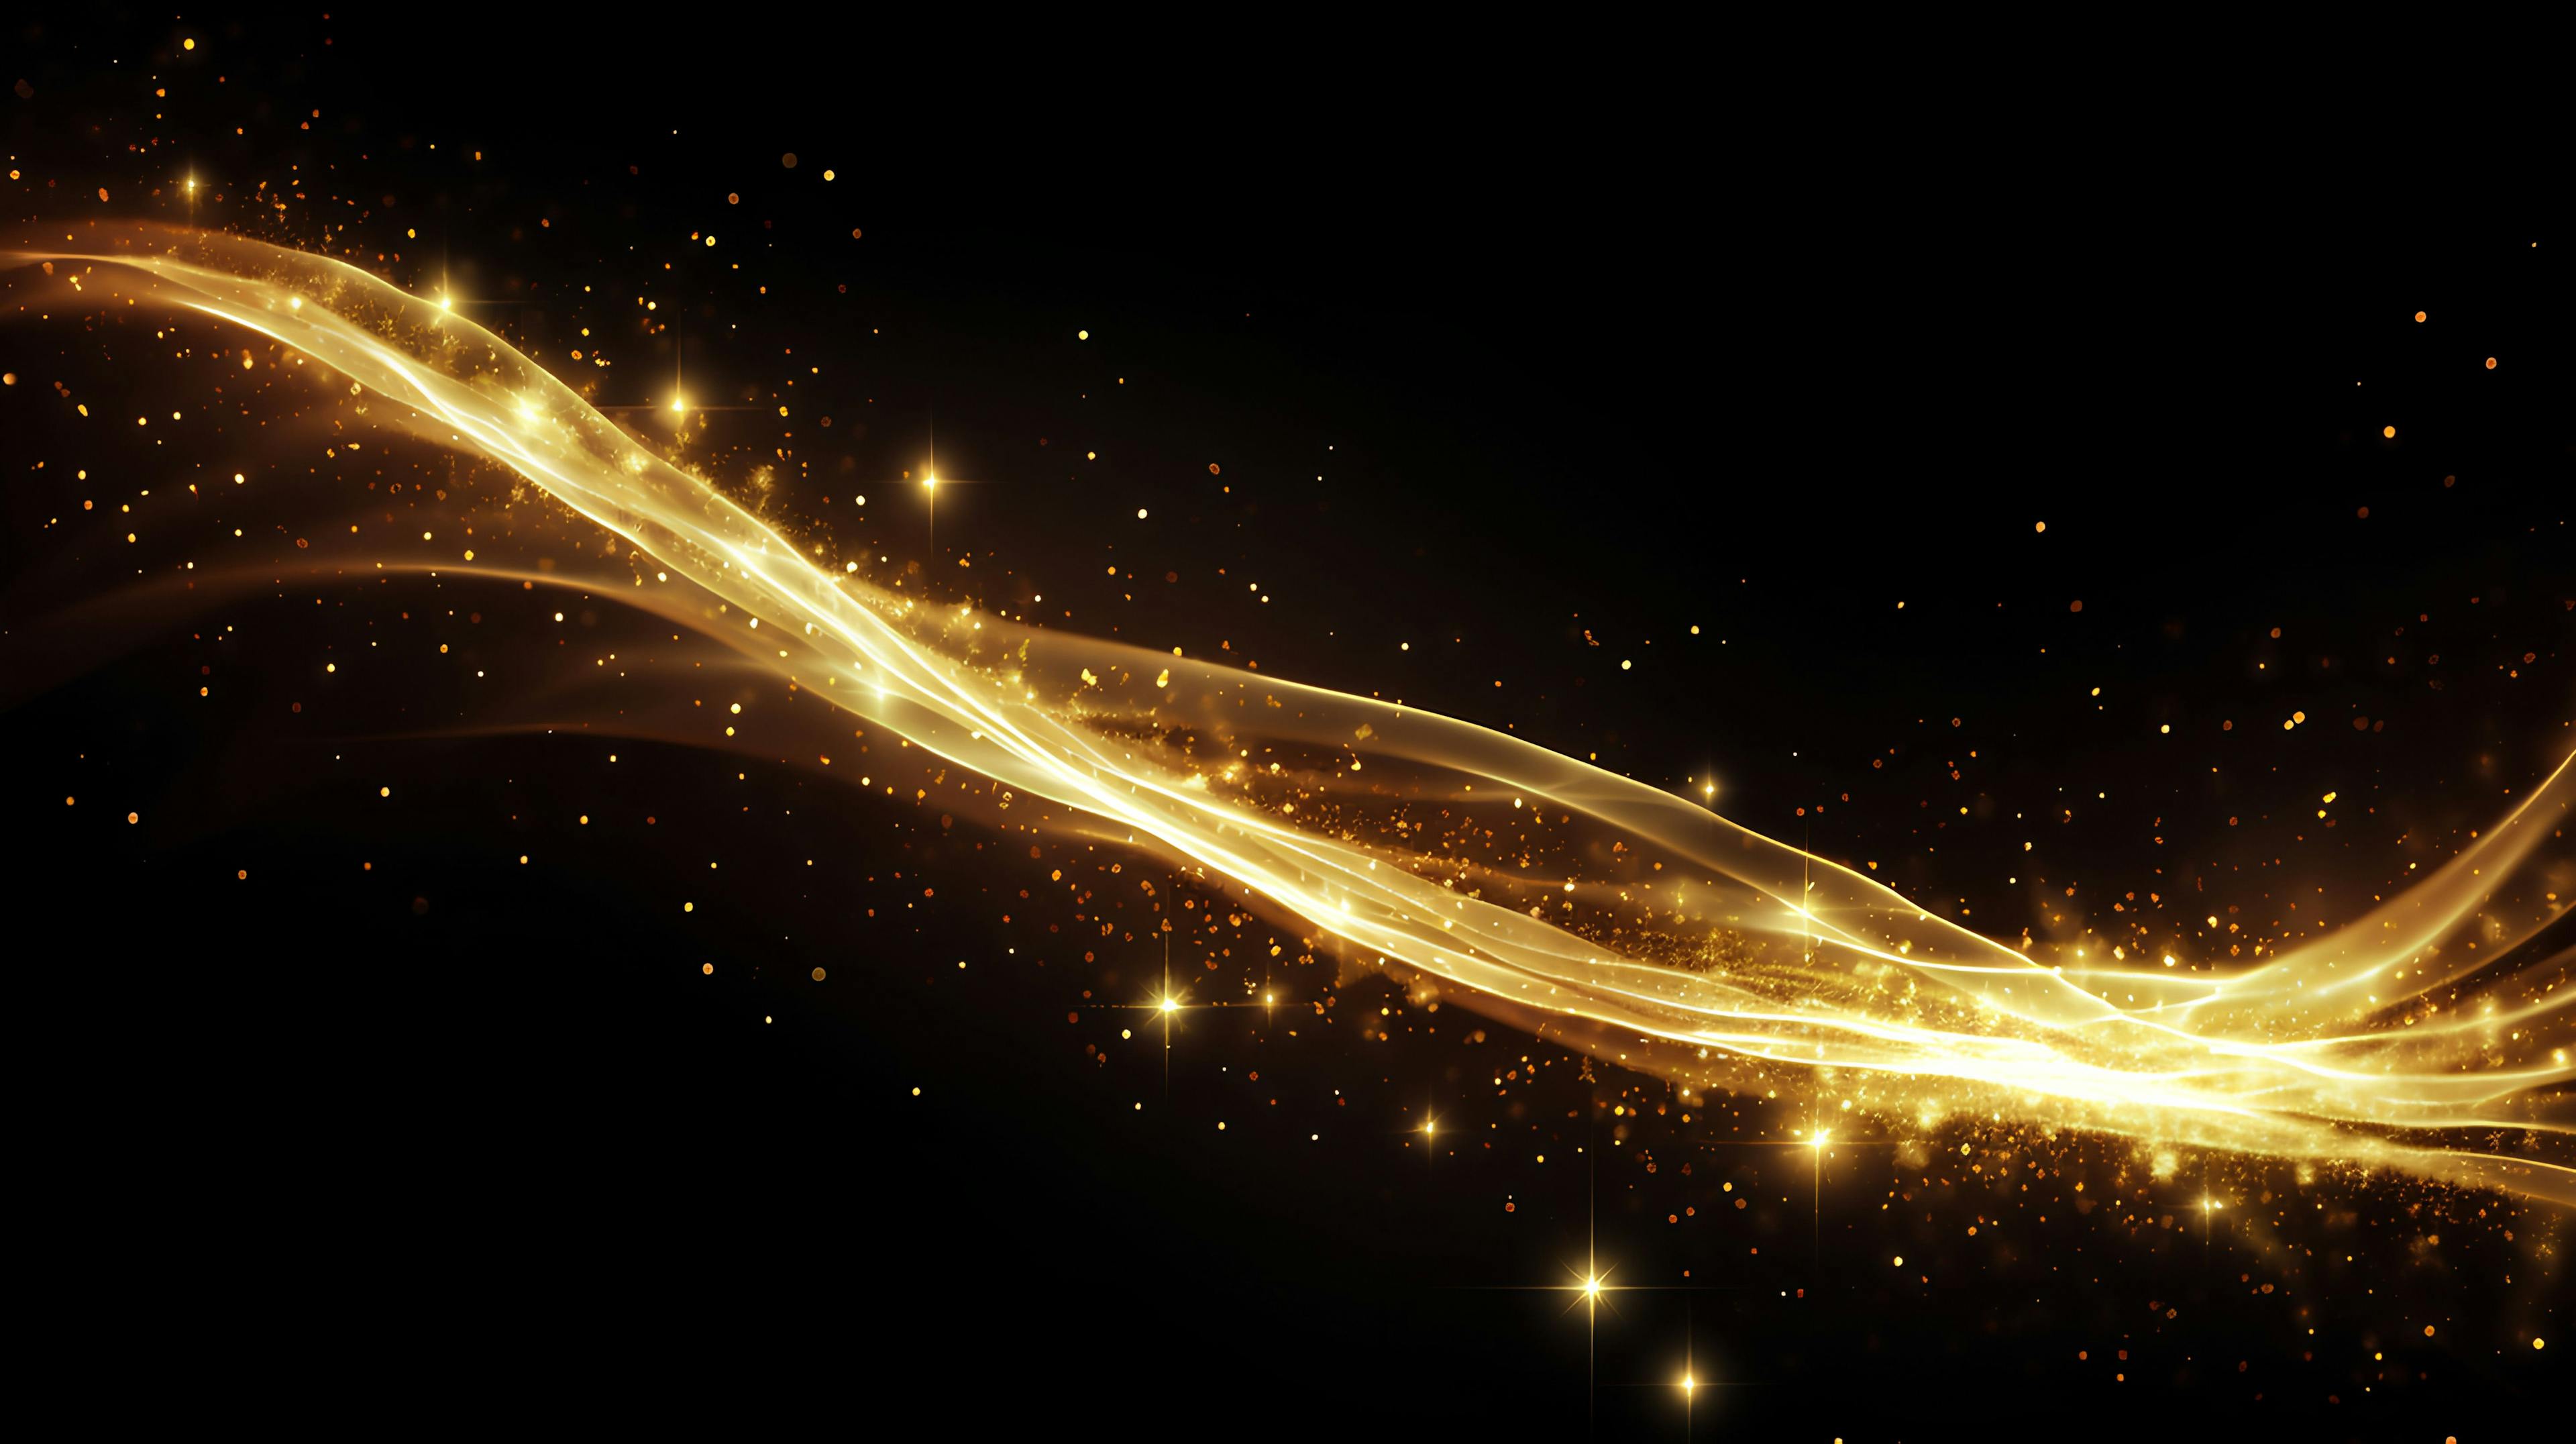 A luminous and radiant golden glitter light trail, resembling the sparkling and shining trace of a comet, featuring a captivating glare effect. This display of gold glittering magic emits a shimmering light | Image Credit: © StockSavant - stock.adobe.com